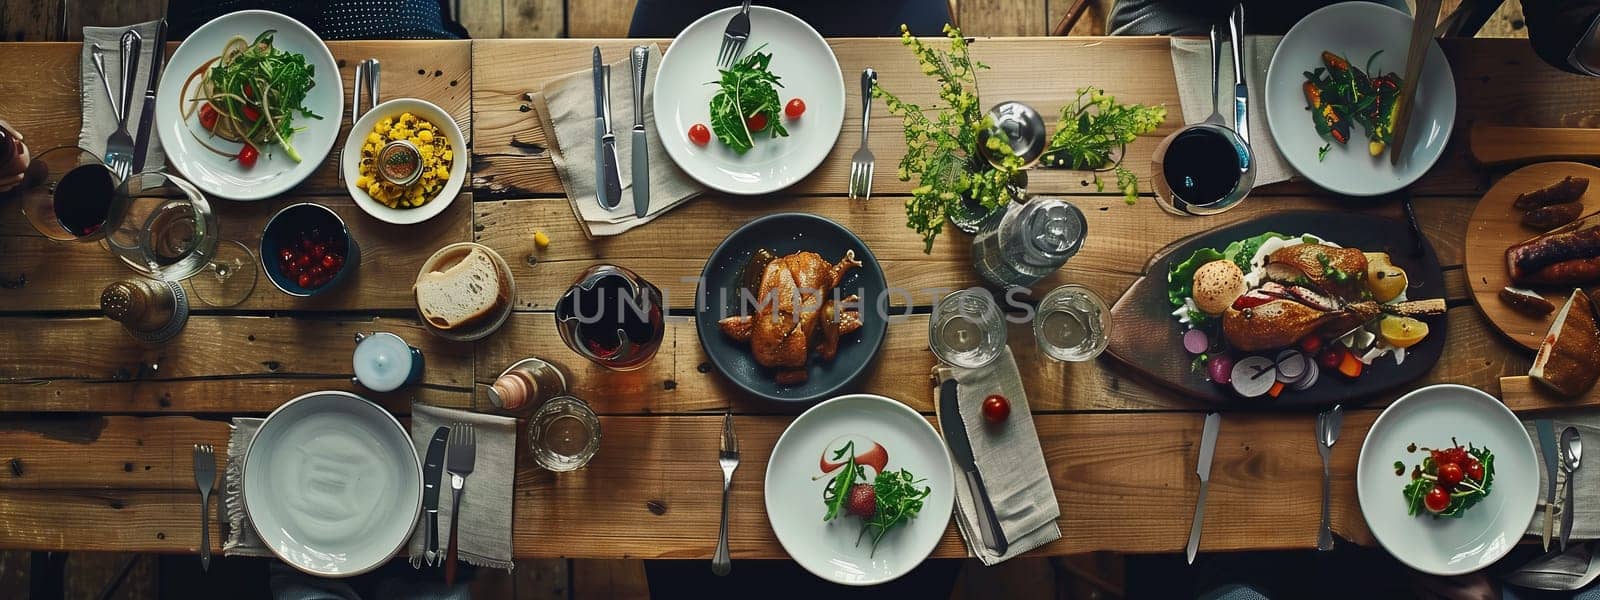 A wooden table adorned with plantbased cuisine, elegant tableware, and gleaming wine glasses set in a lush grassy setting